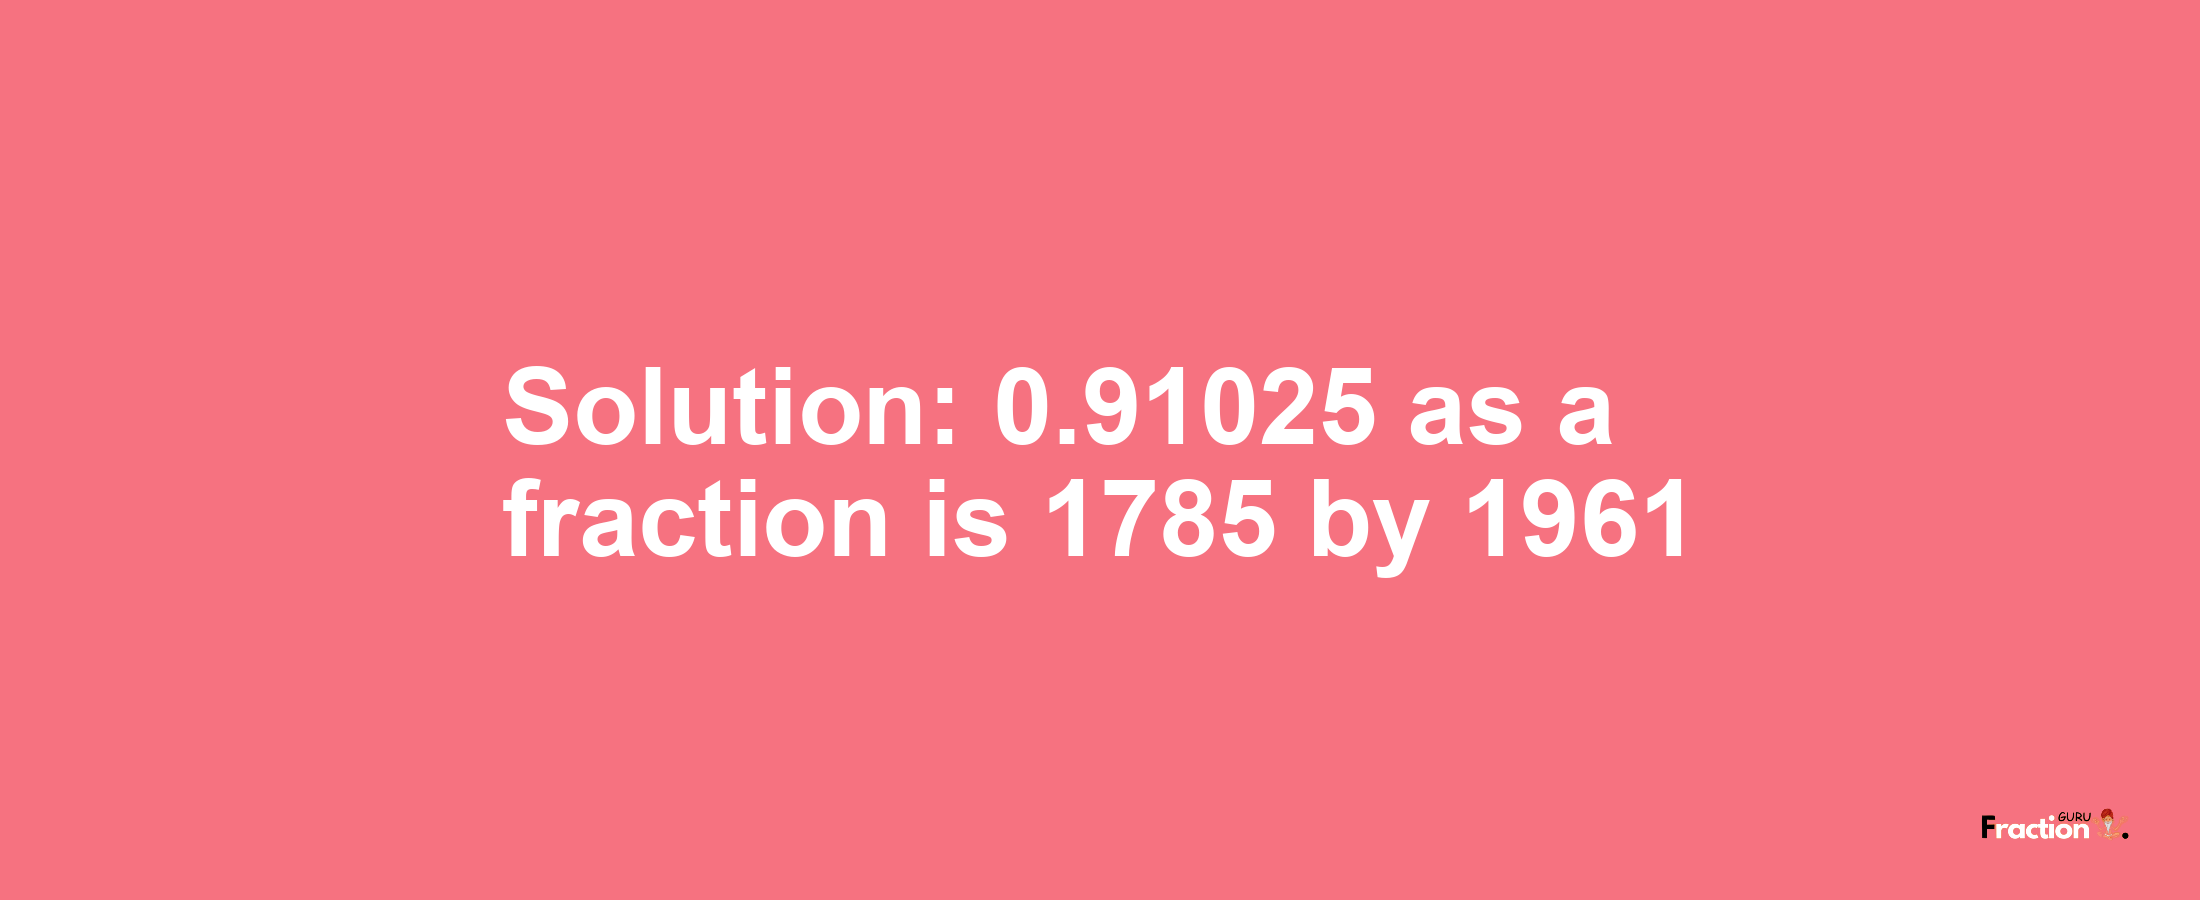 Solution:0.91025 as a fraction is 1785/1961